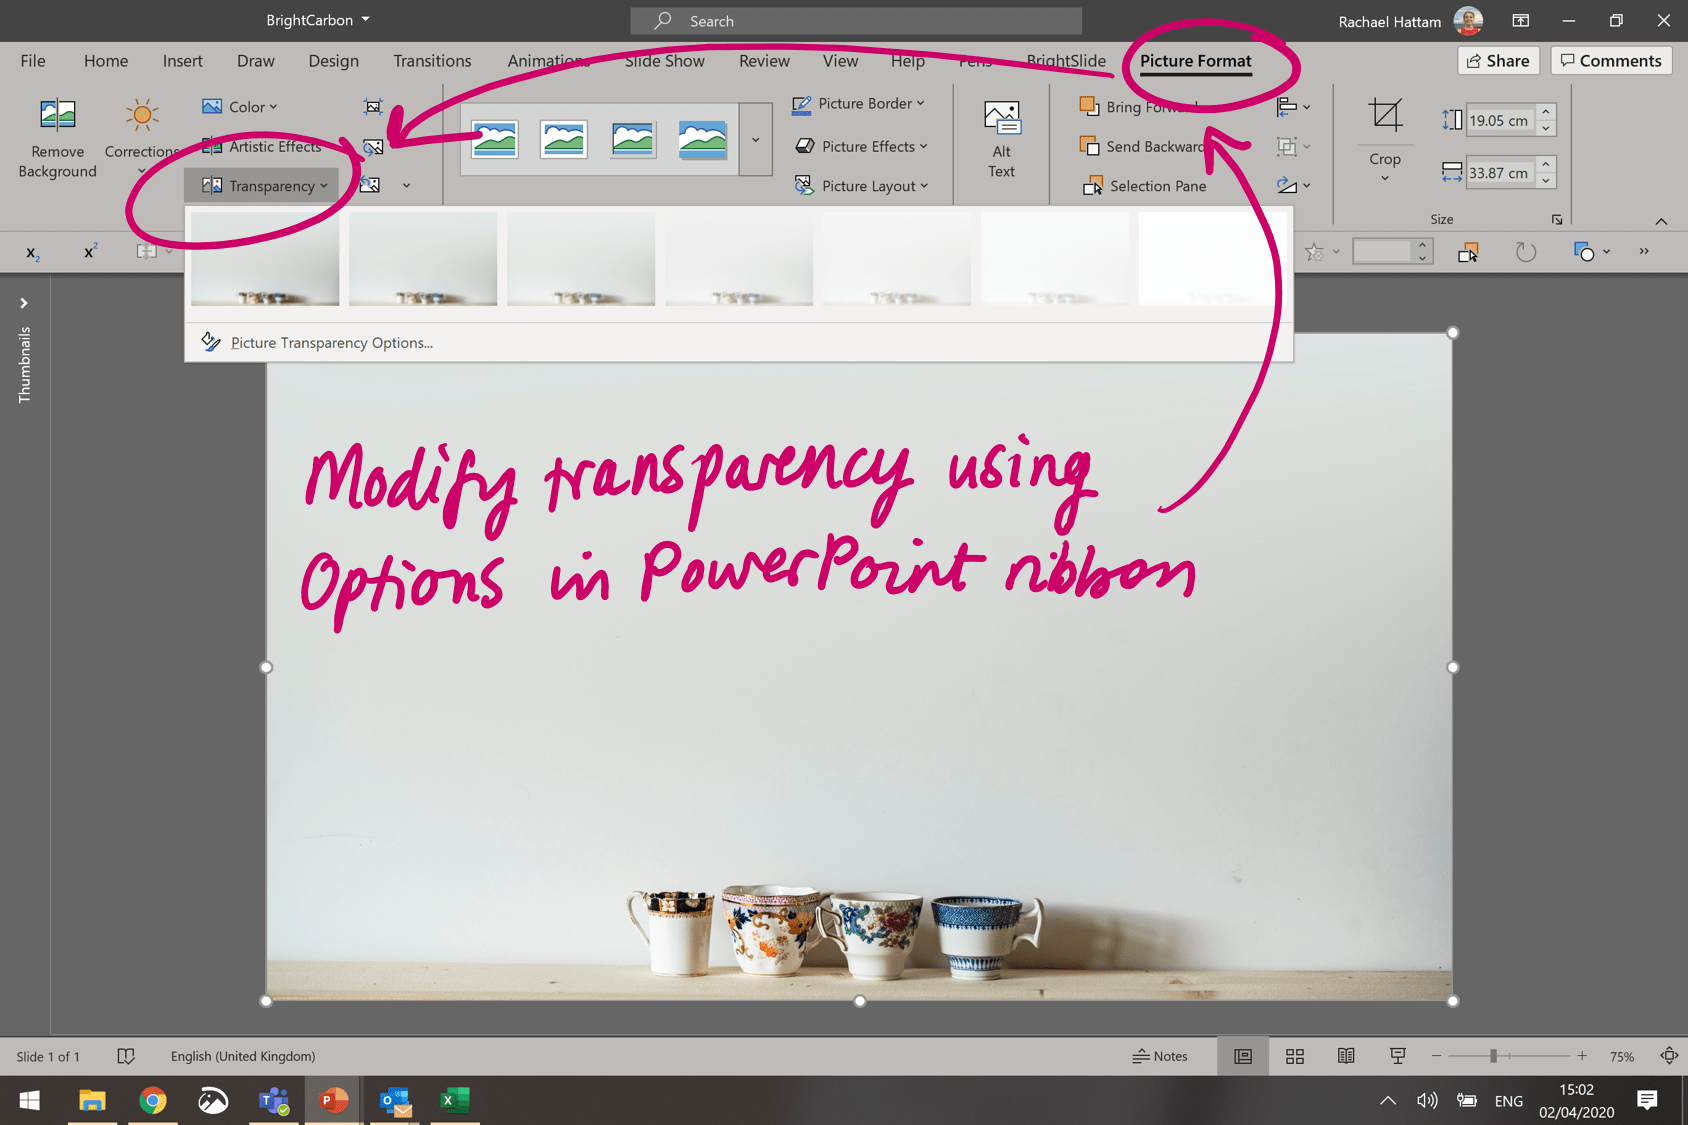 How to make images transparent in PowerPoint | BrightCarbon